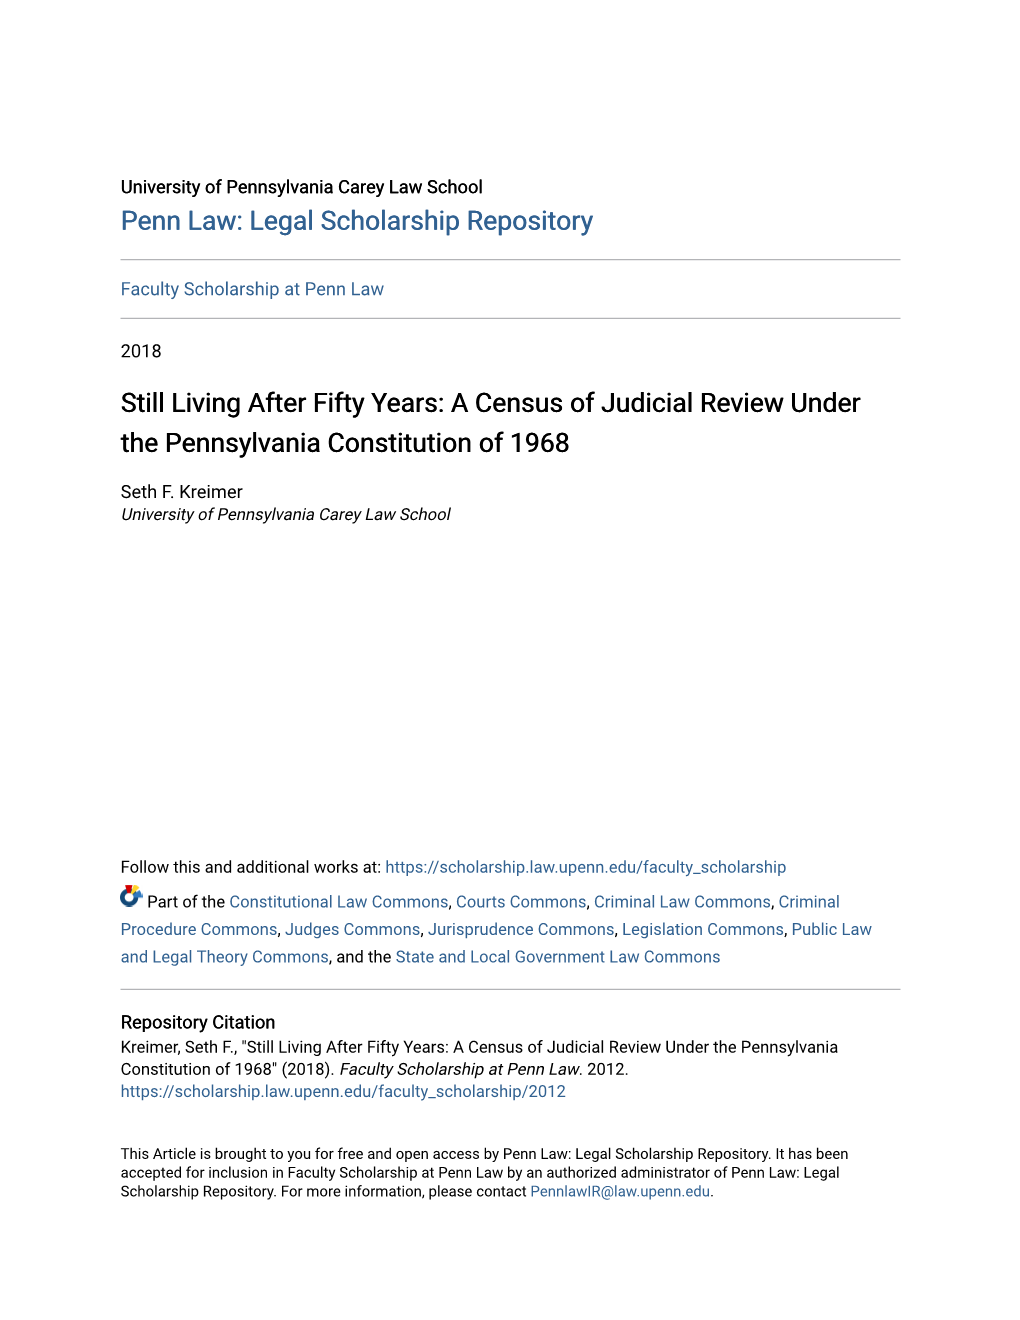 Still Living After Fifty Years: a Census of Judicial Review Under the Pennsylvania Constitution of 1968